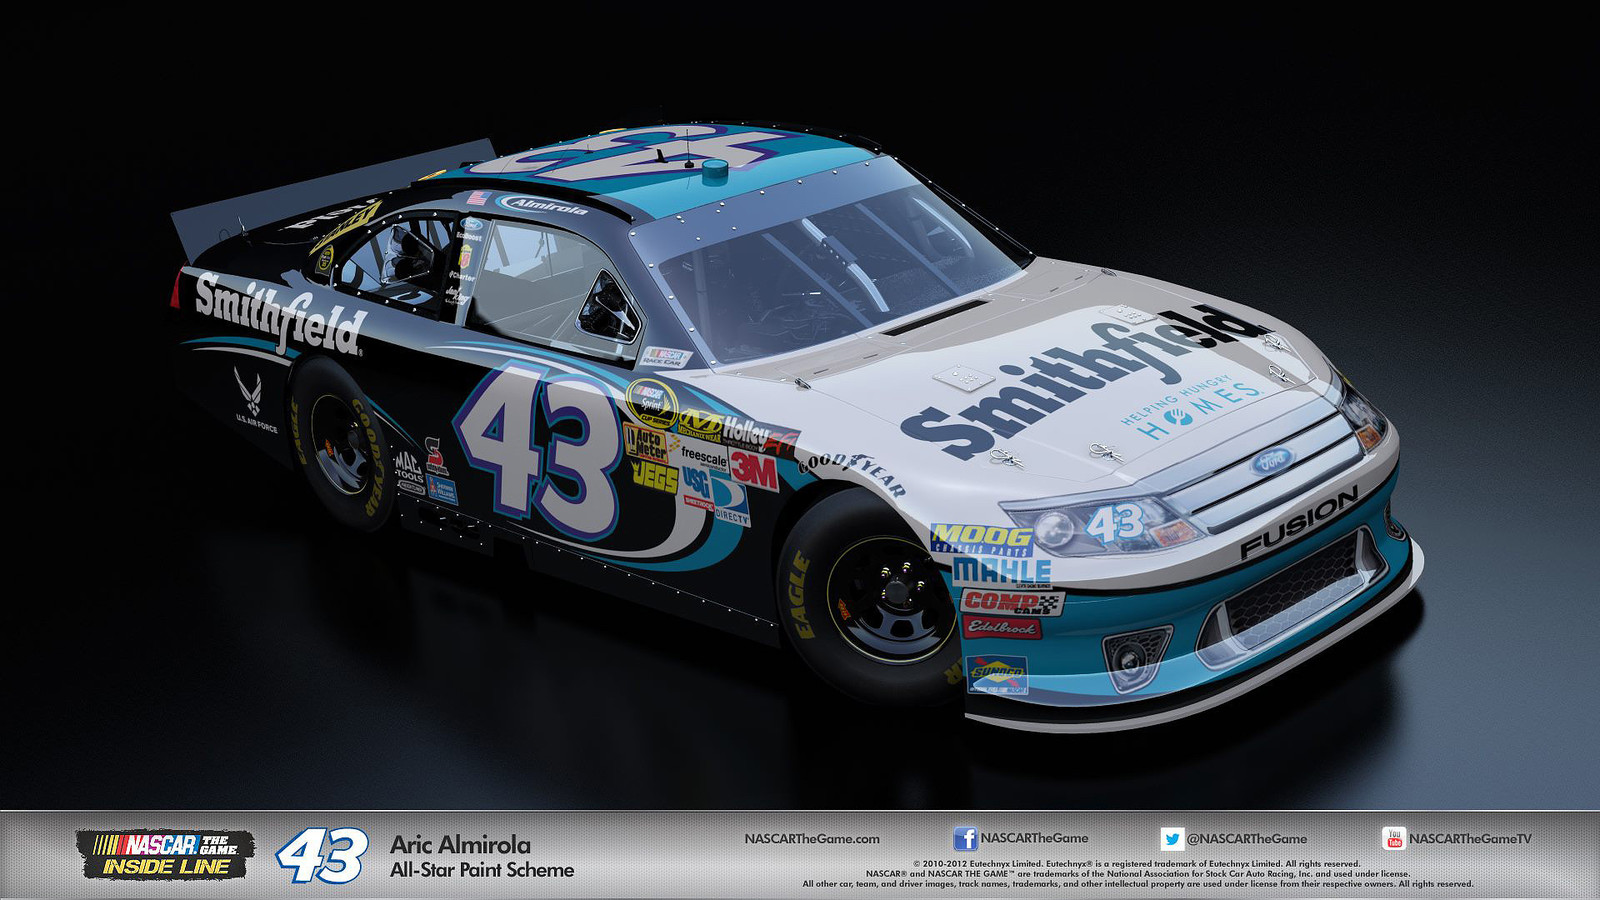 The 2012 #43 Smithfield car as seen in the 'NASCAR: Inside Line' video game for Playstation 3, XBOX 360, and Nintendo Wii (Image and render taken from the game's official Facebook page)